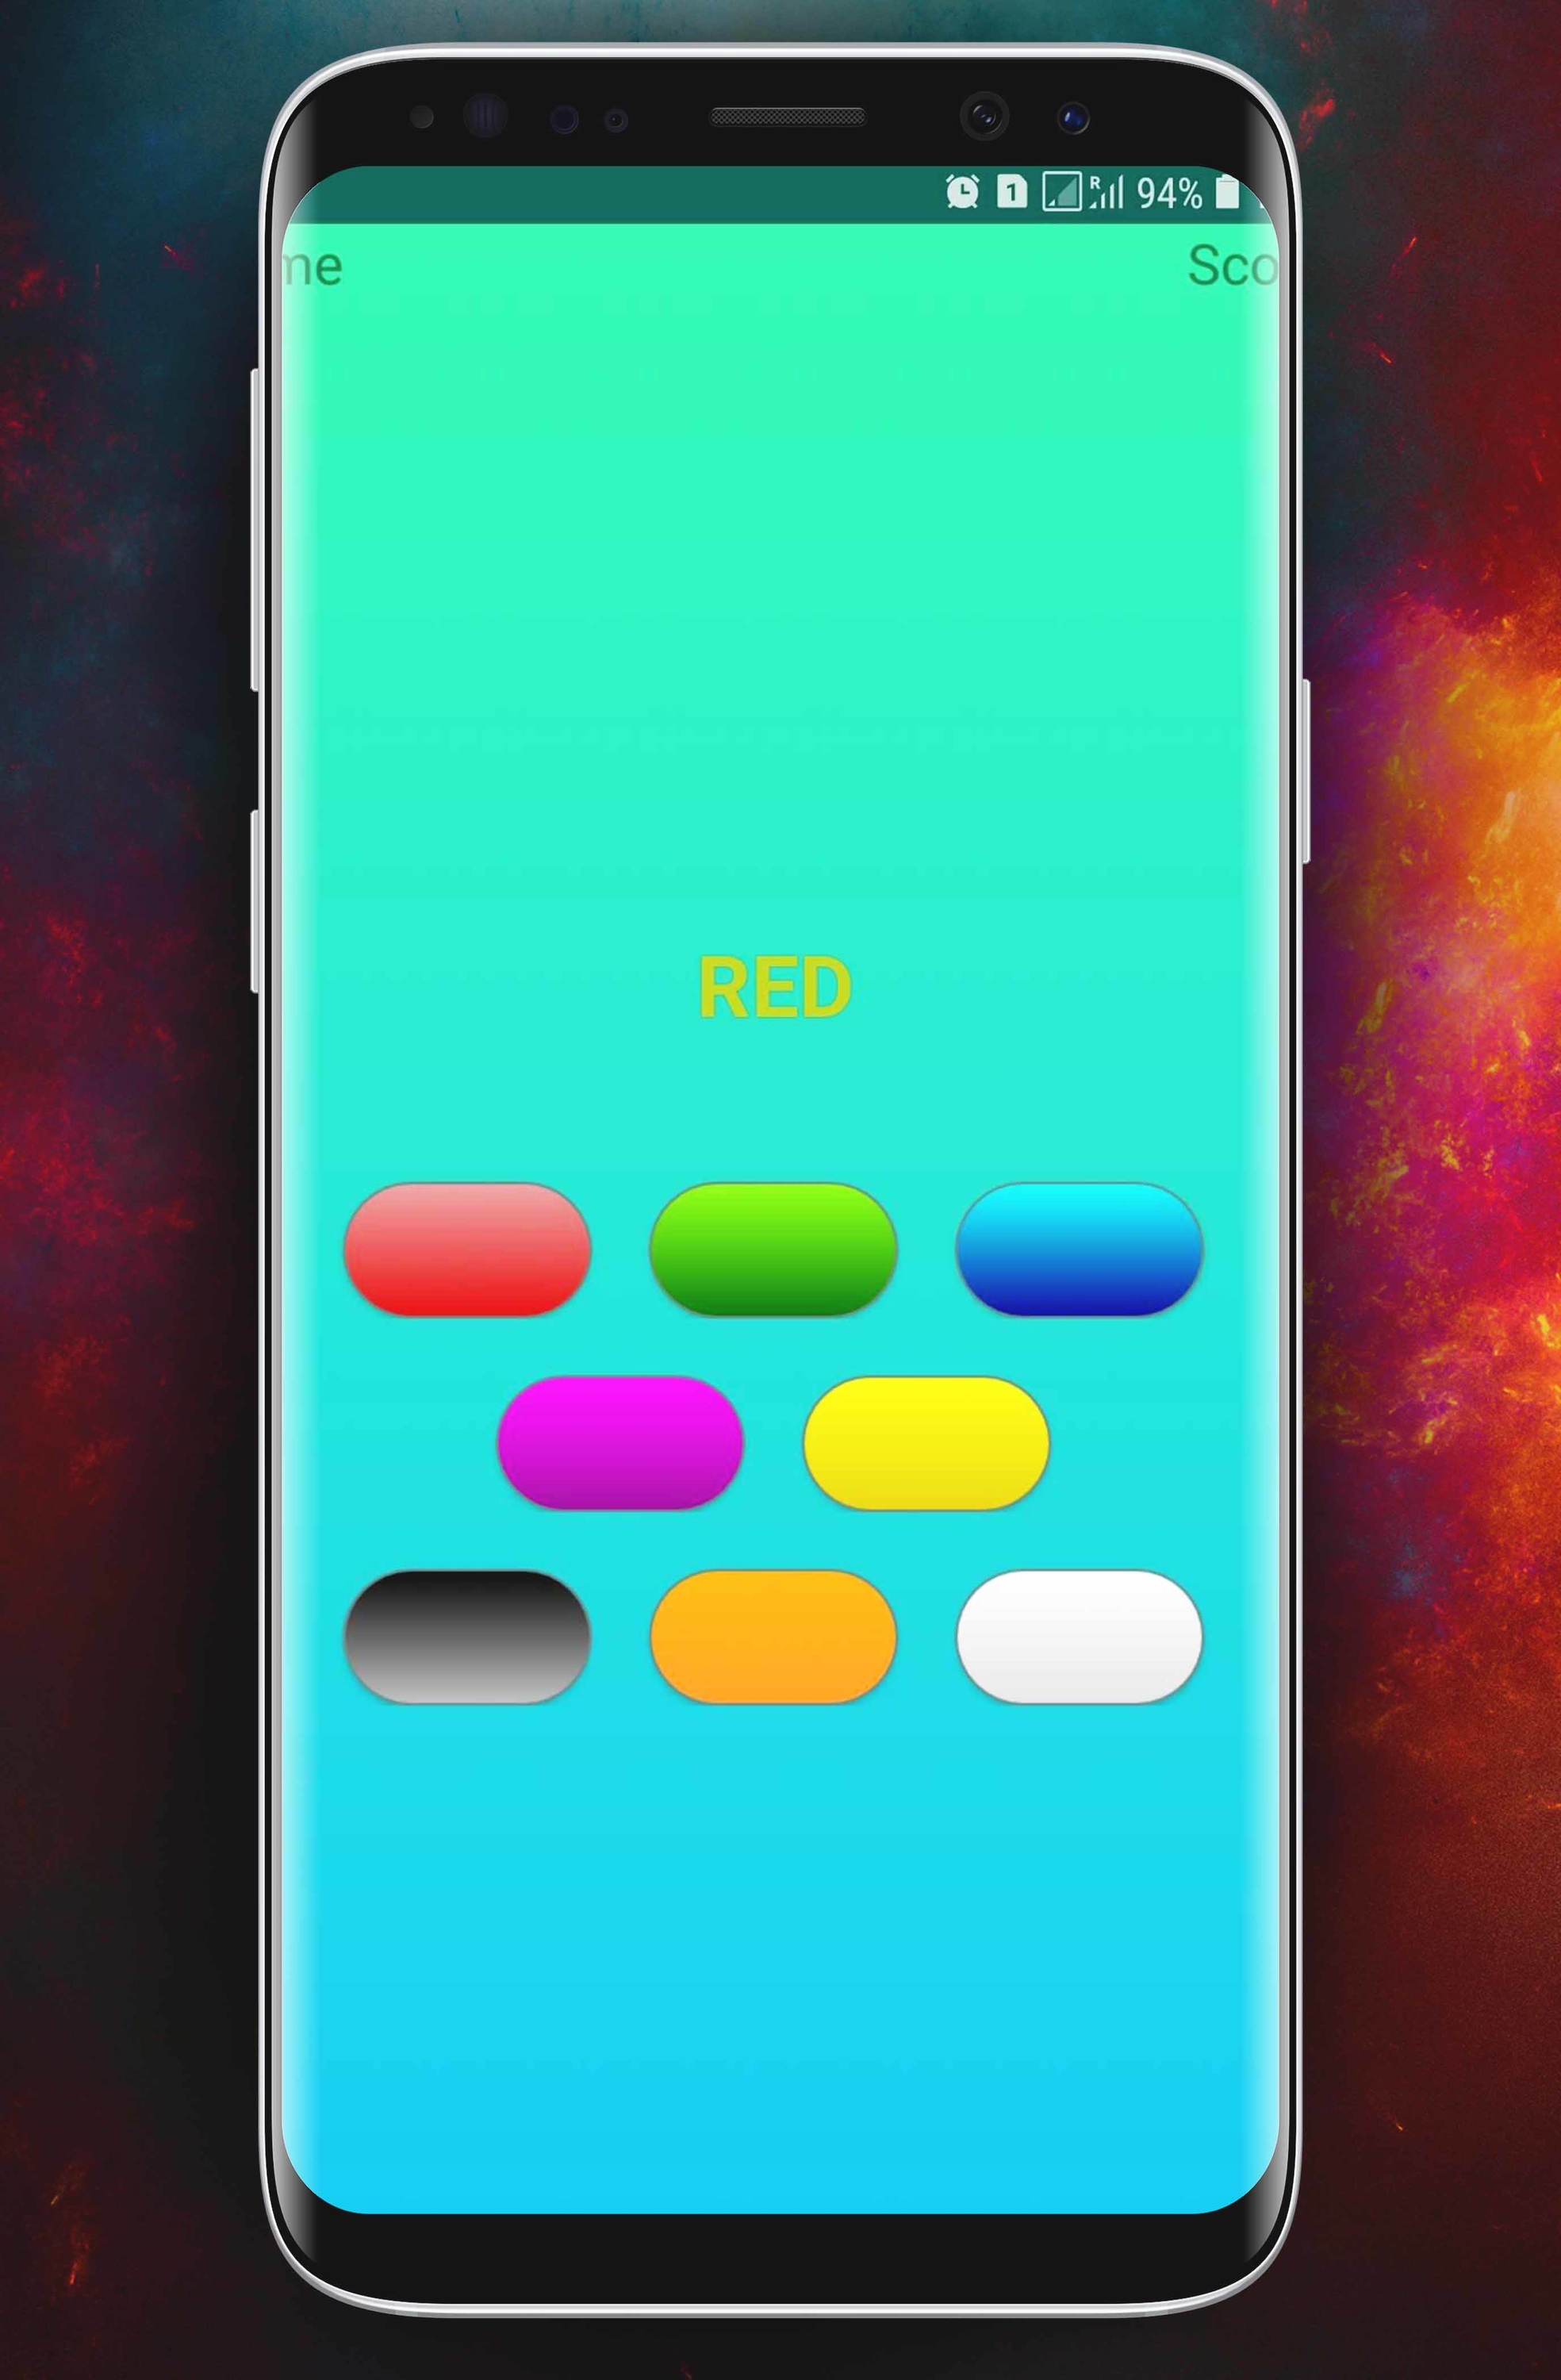 Color Tap Frenzy